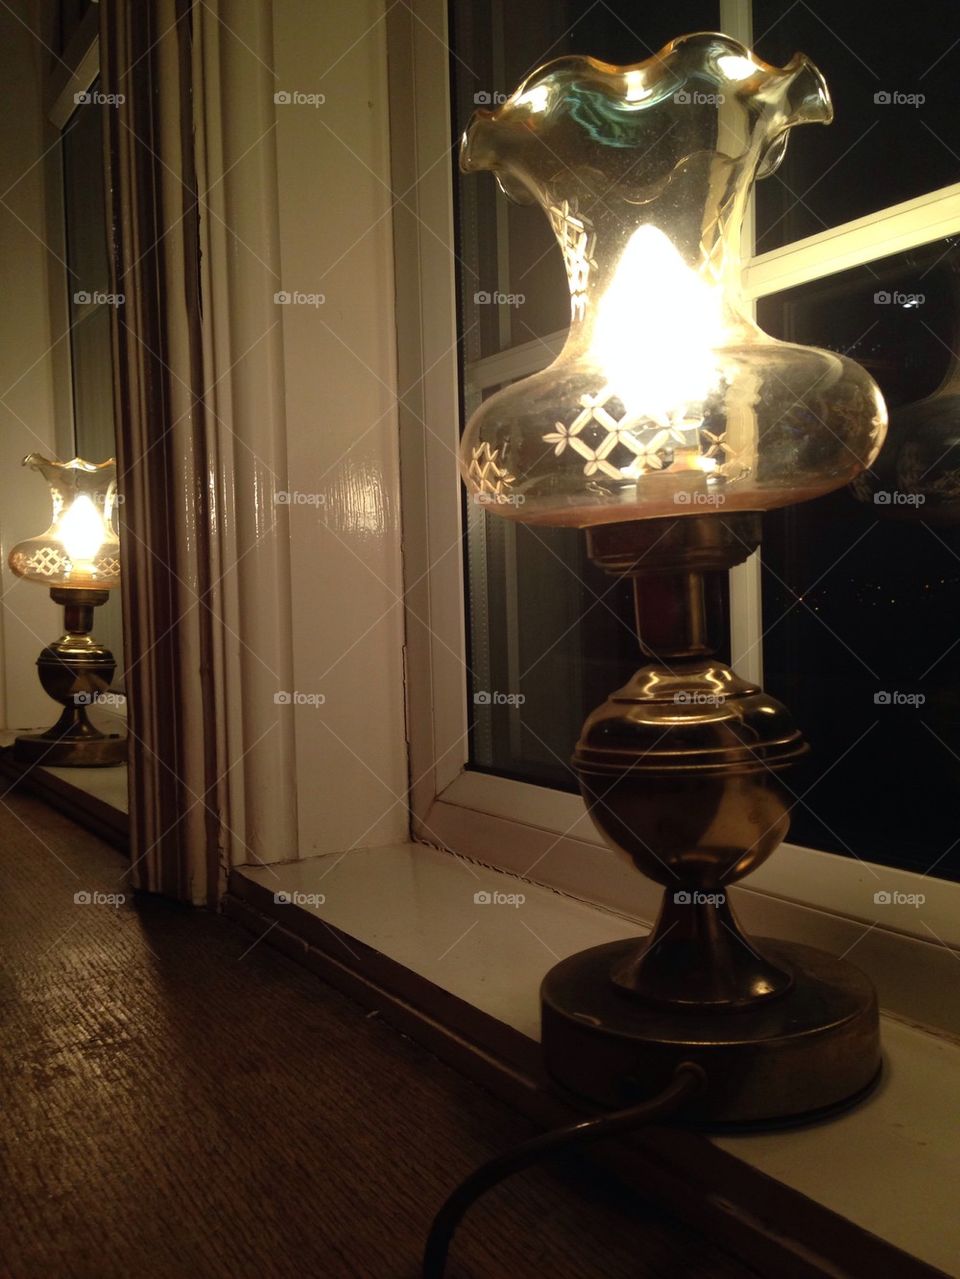 Lamps in the window of a country inn